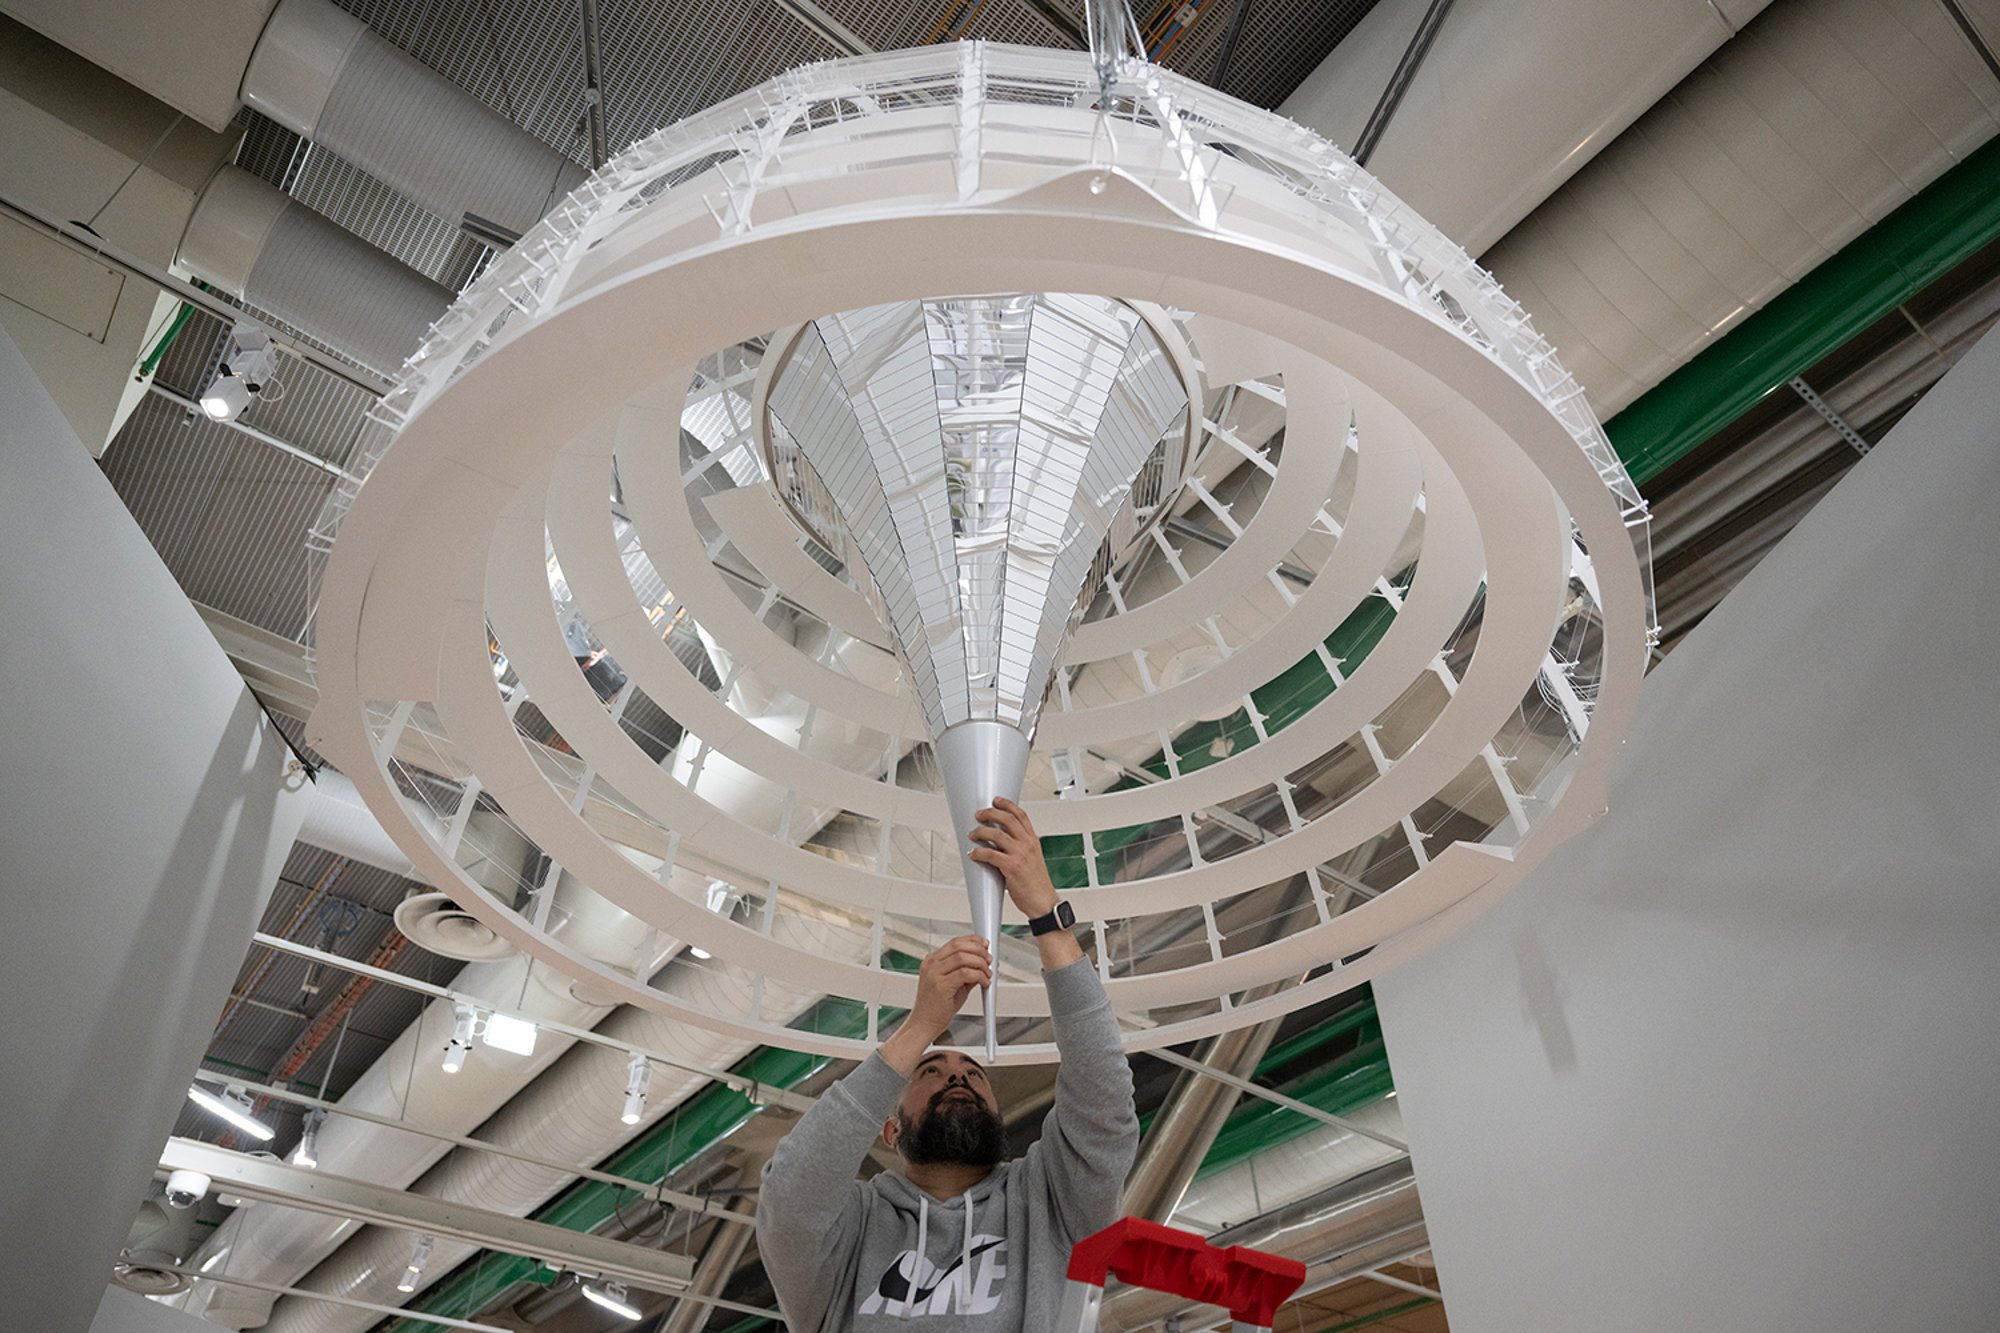 Adjusting the model of the Reichstag's cupola, where people ascend symbolically above the heads of their representatives in the chamber. The transformation of the Reichstag is rooted in four related issues: the Bundestag’s significance as a democratic forum, an understanding of history, a commitment to accessibility and a vigorous environmental agenda.